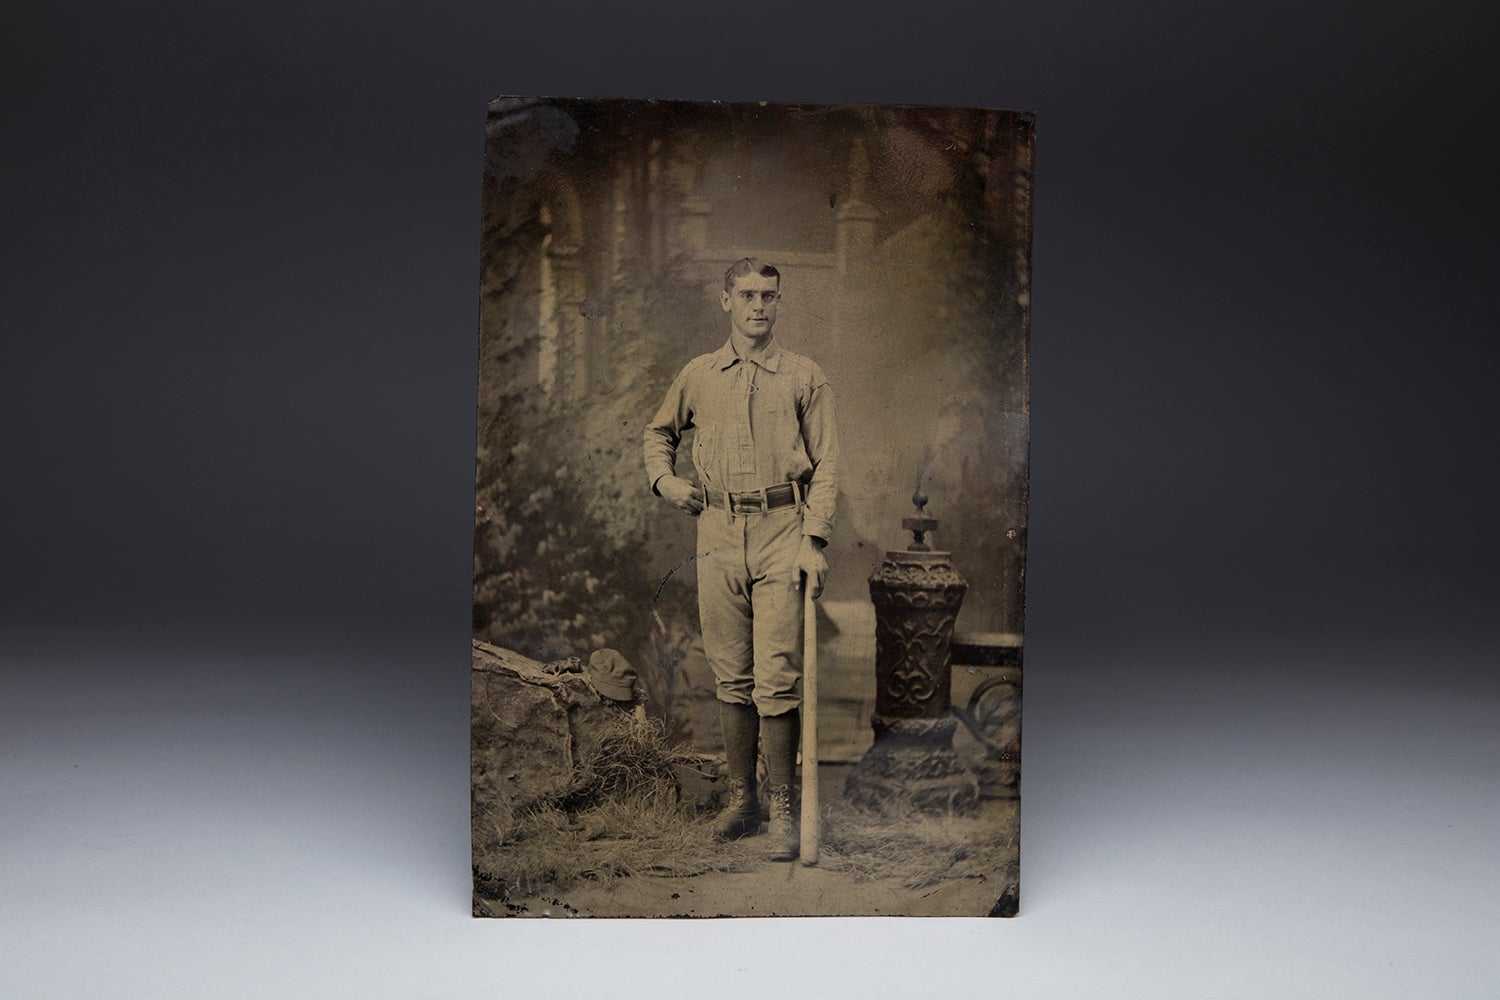 #Shortstops: Historic tintype photo of Sim Bullas donated to Hall of Fame